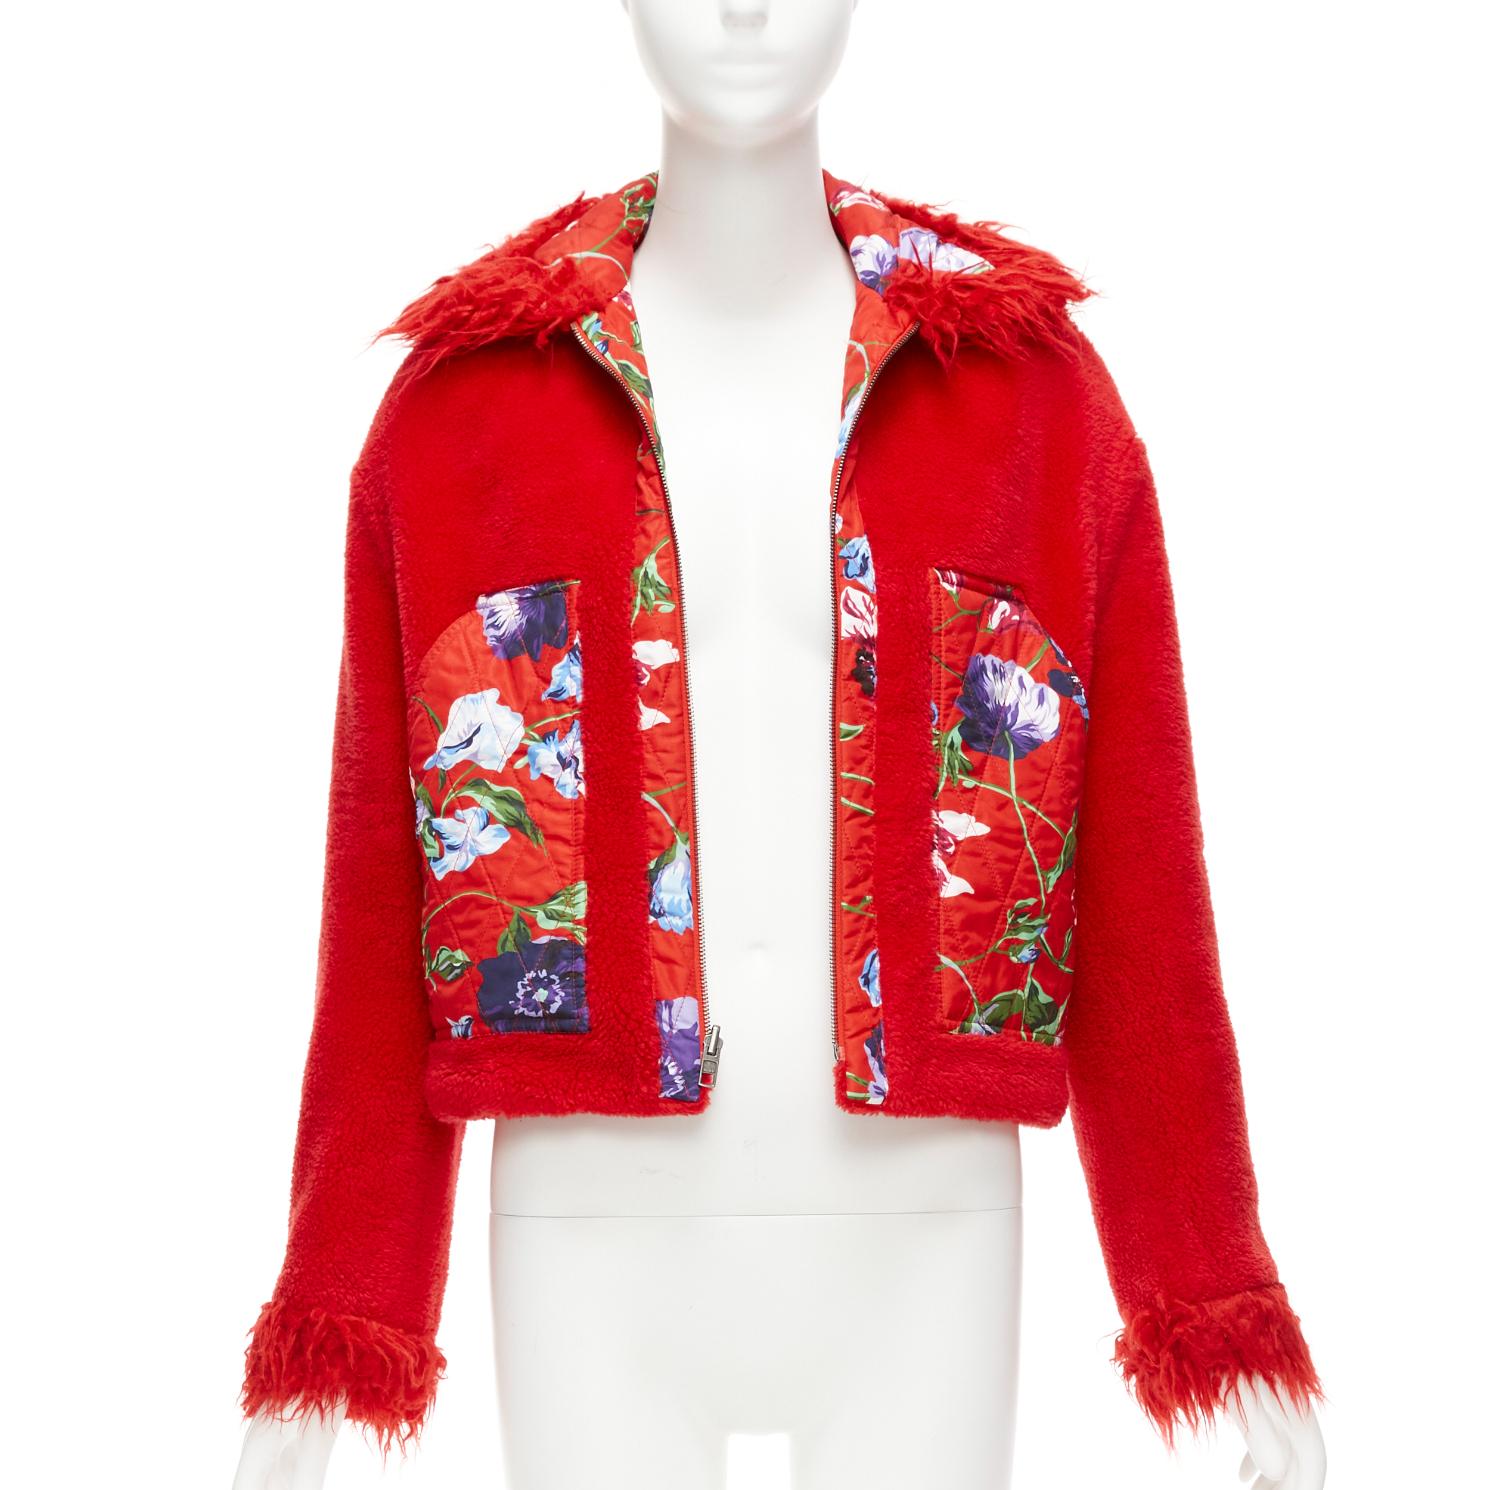 KENZO Memento reversible red purple flower print faux fur crop jacket FR34 XS
Reference: CELG/A00424
Brand: Kenzo
Collection: Memento
As seen on: Sophie Turner
Material: Polyester, Faux Fur
Color: Red, Purple
Pattern: Floral
Closure: Zip
Lining: Red